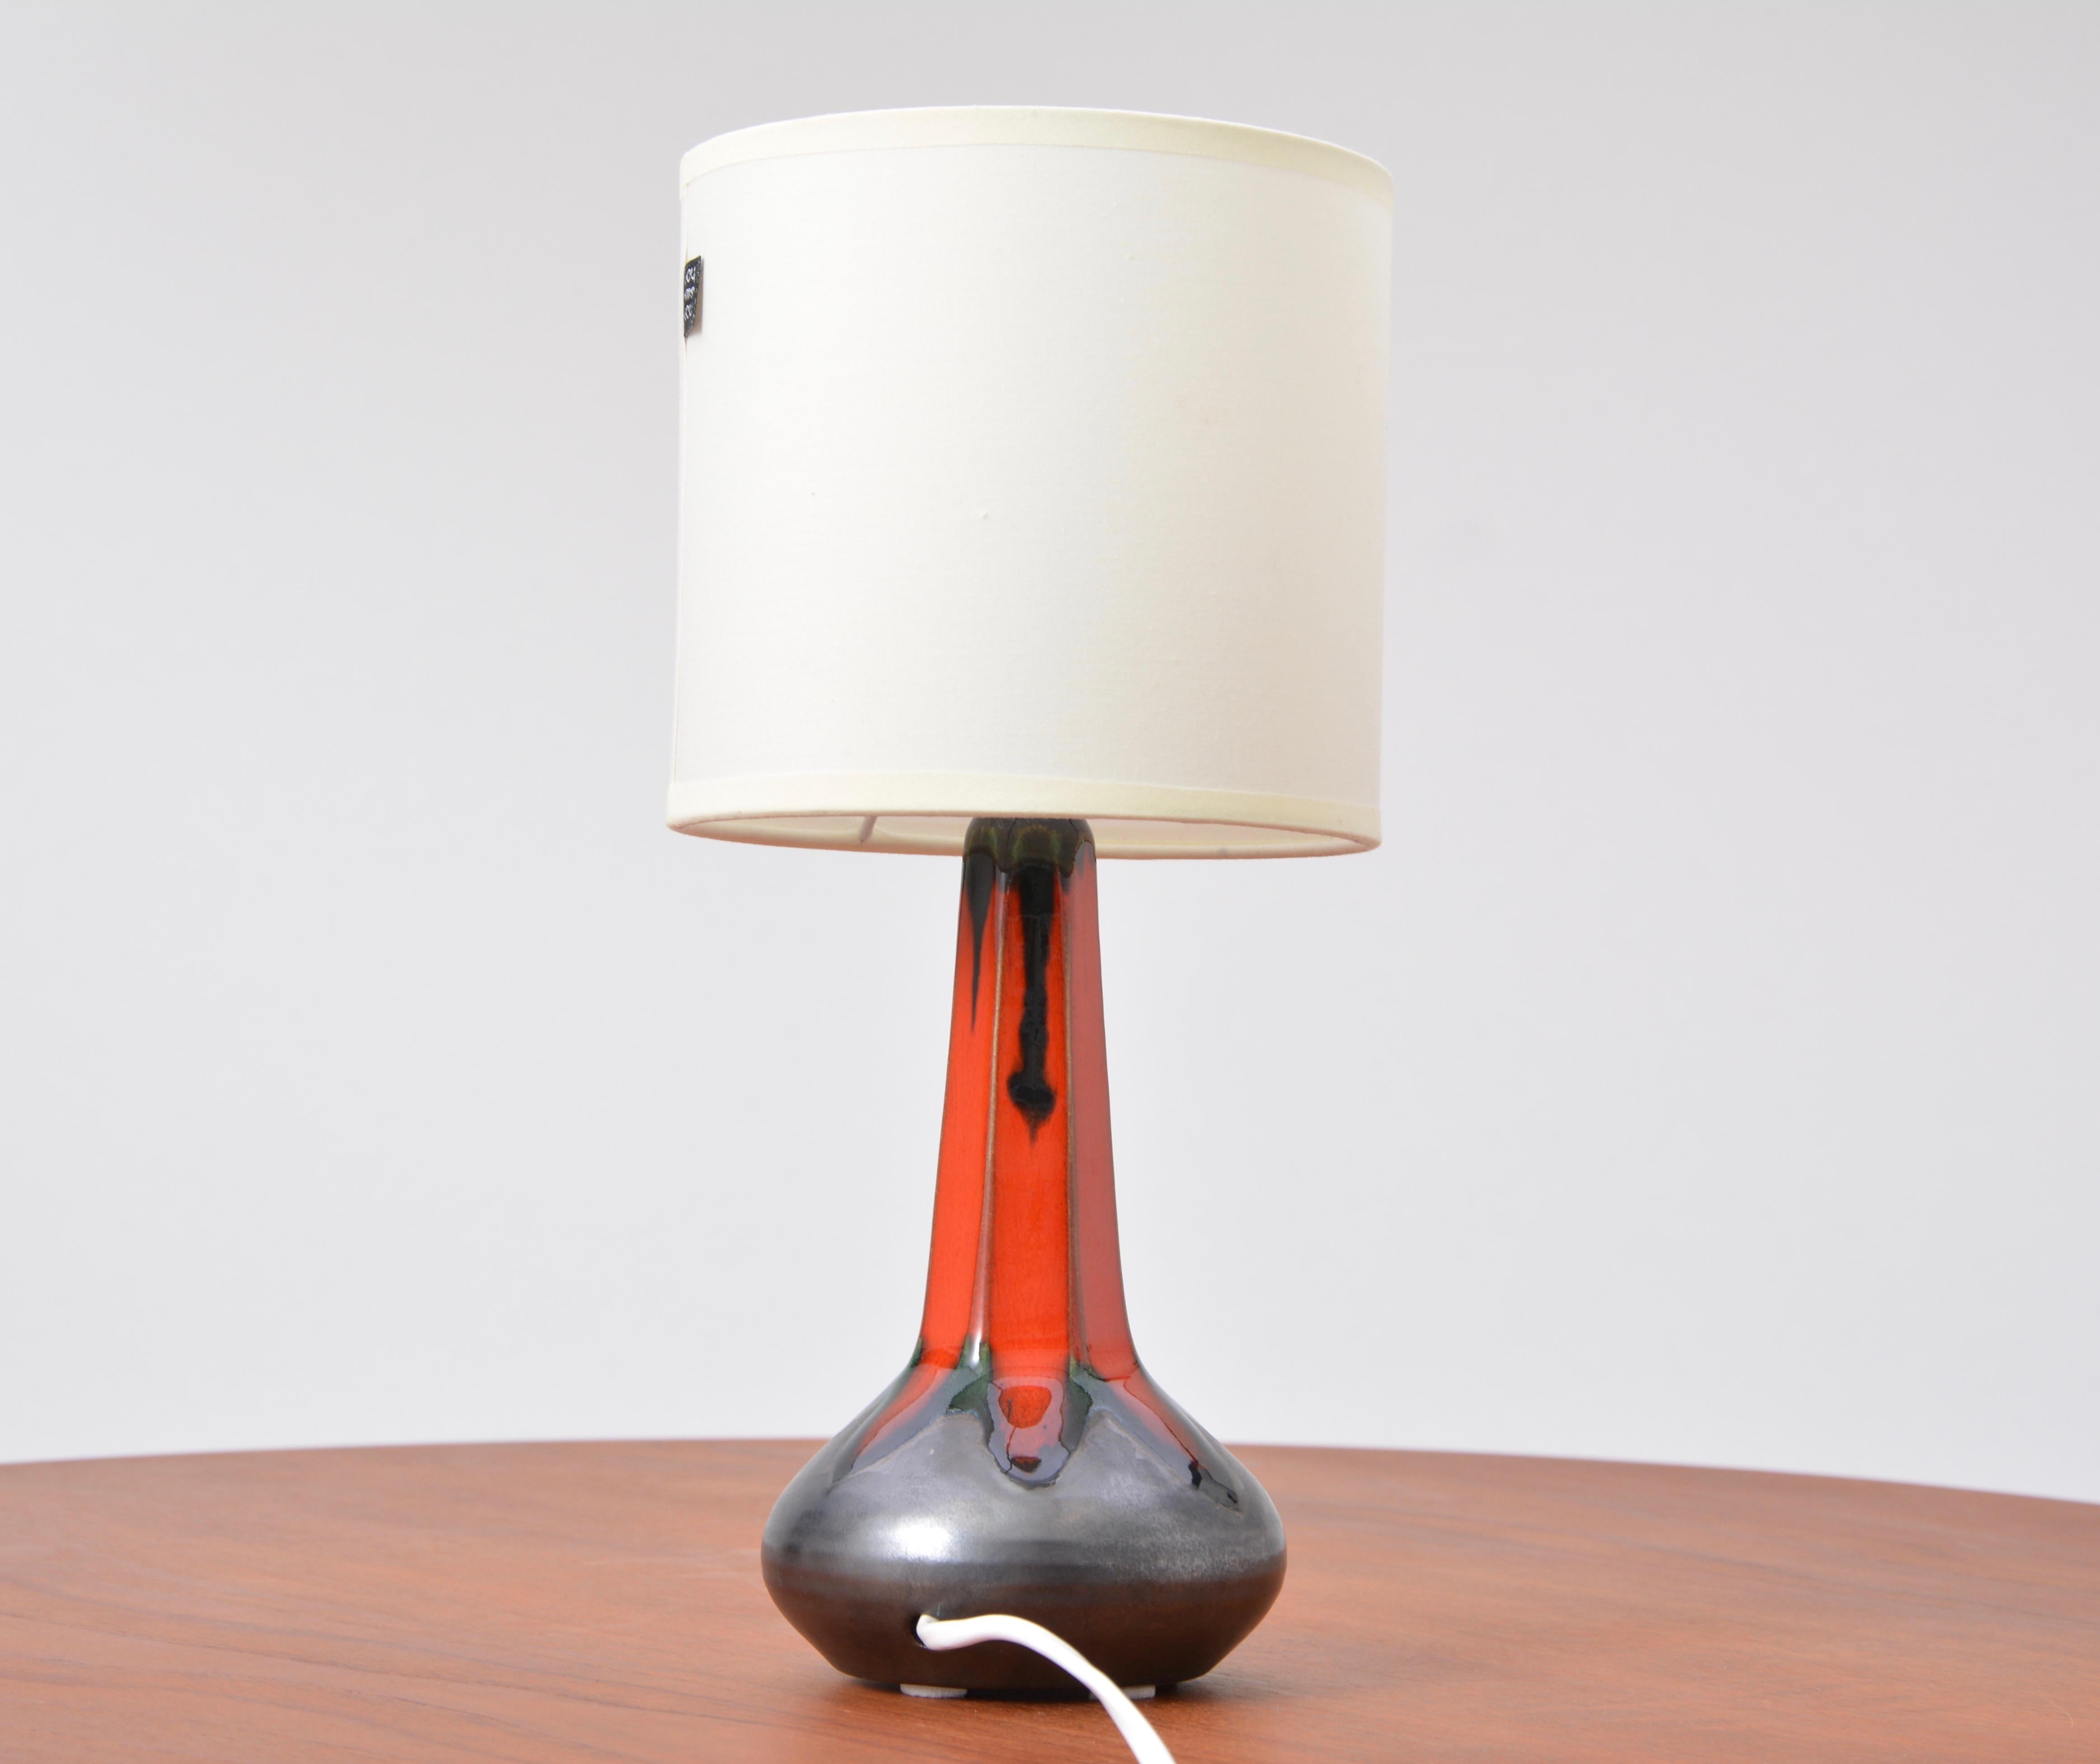 Danish Mid-Century Modern table lamp by Ole Christensen

This ceramic table lamp was designed in the 1960s and produced by Ole Christiansen in Denmark. The lamps base is black, the top has a beautiful red ceramic glaze. It has a new fabric shade,